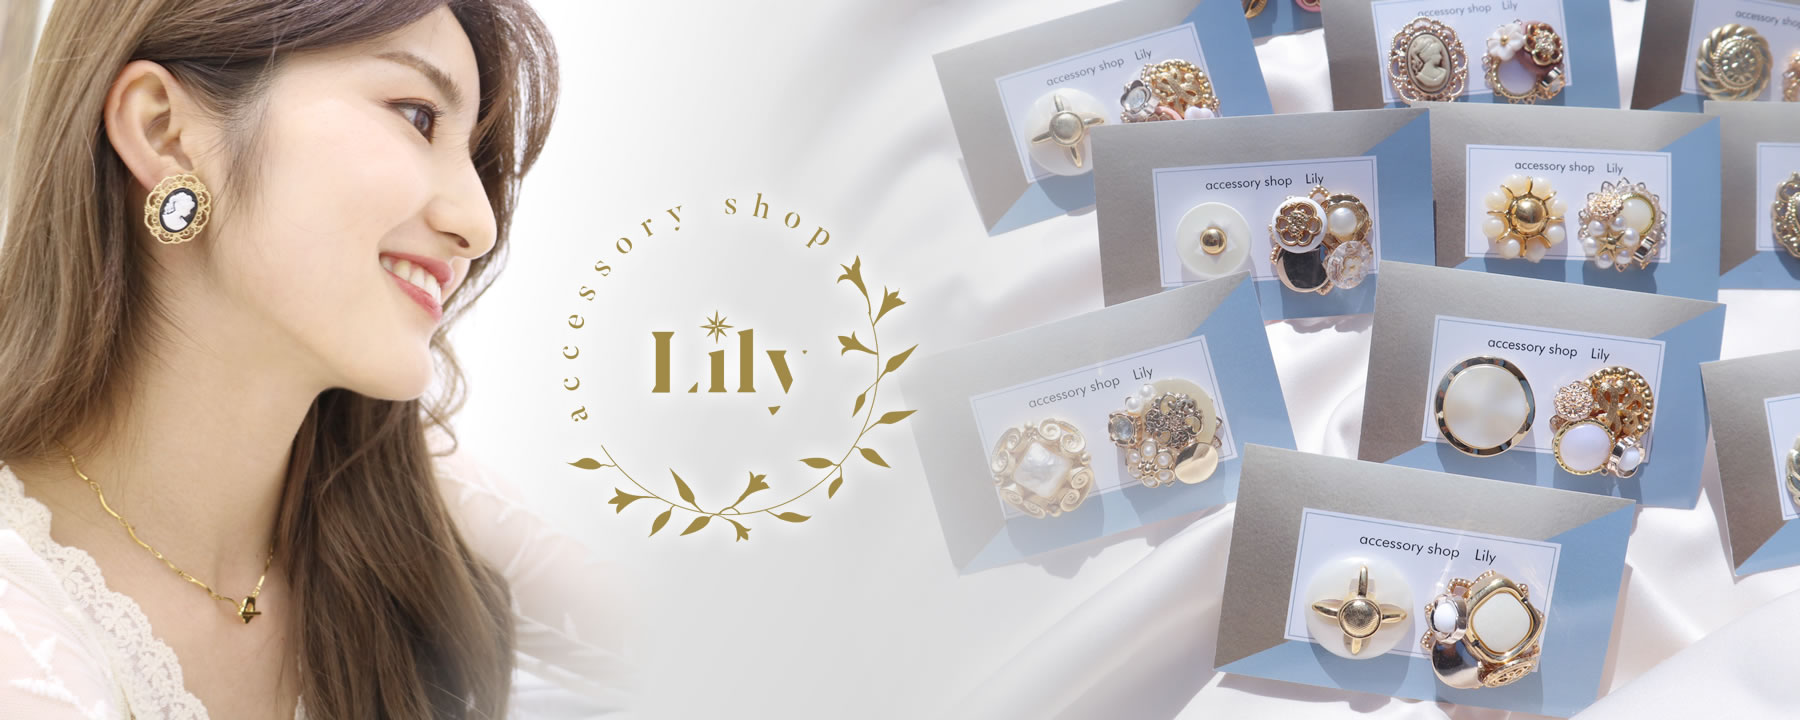 accessory shop Lily